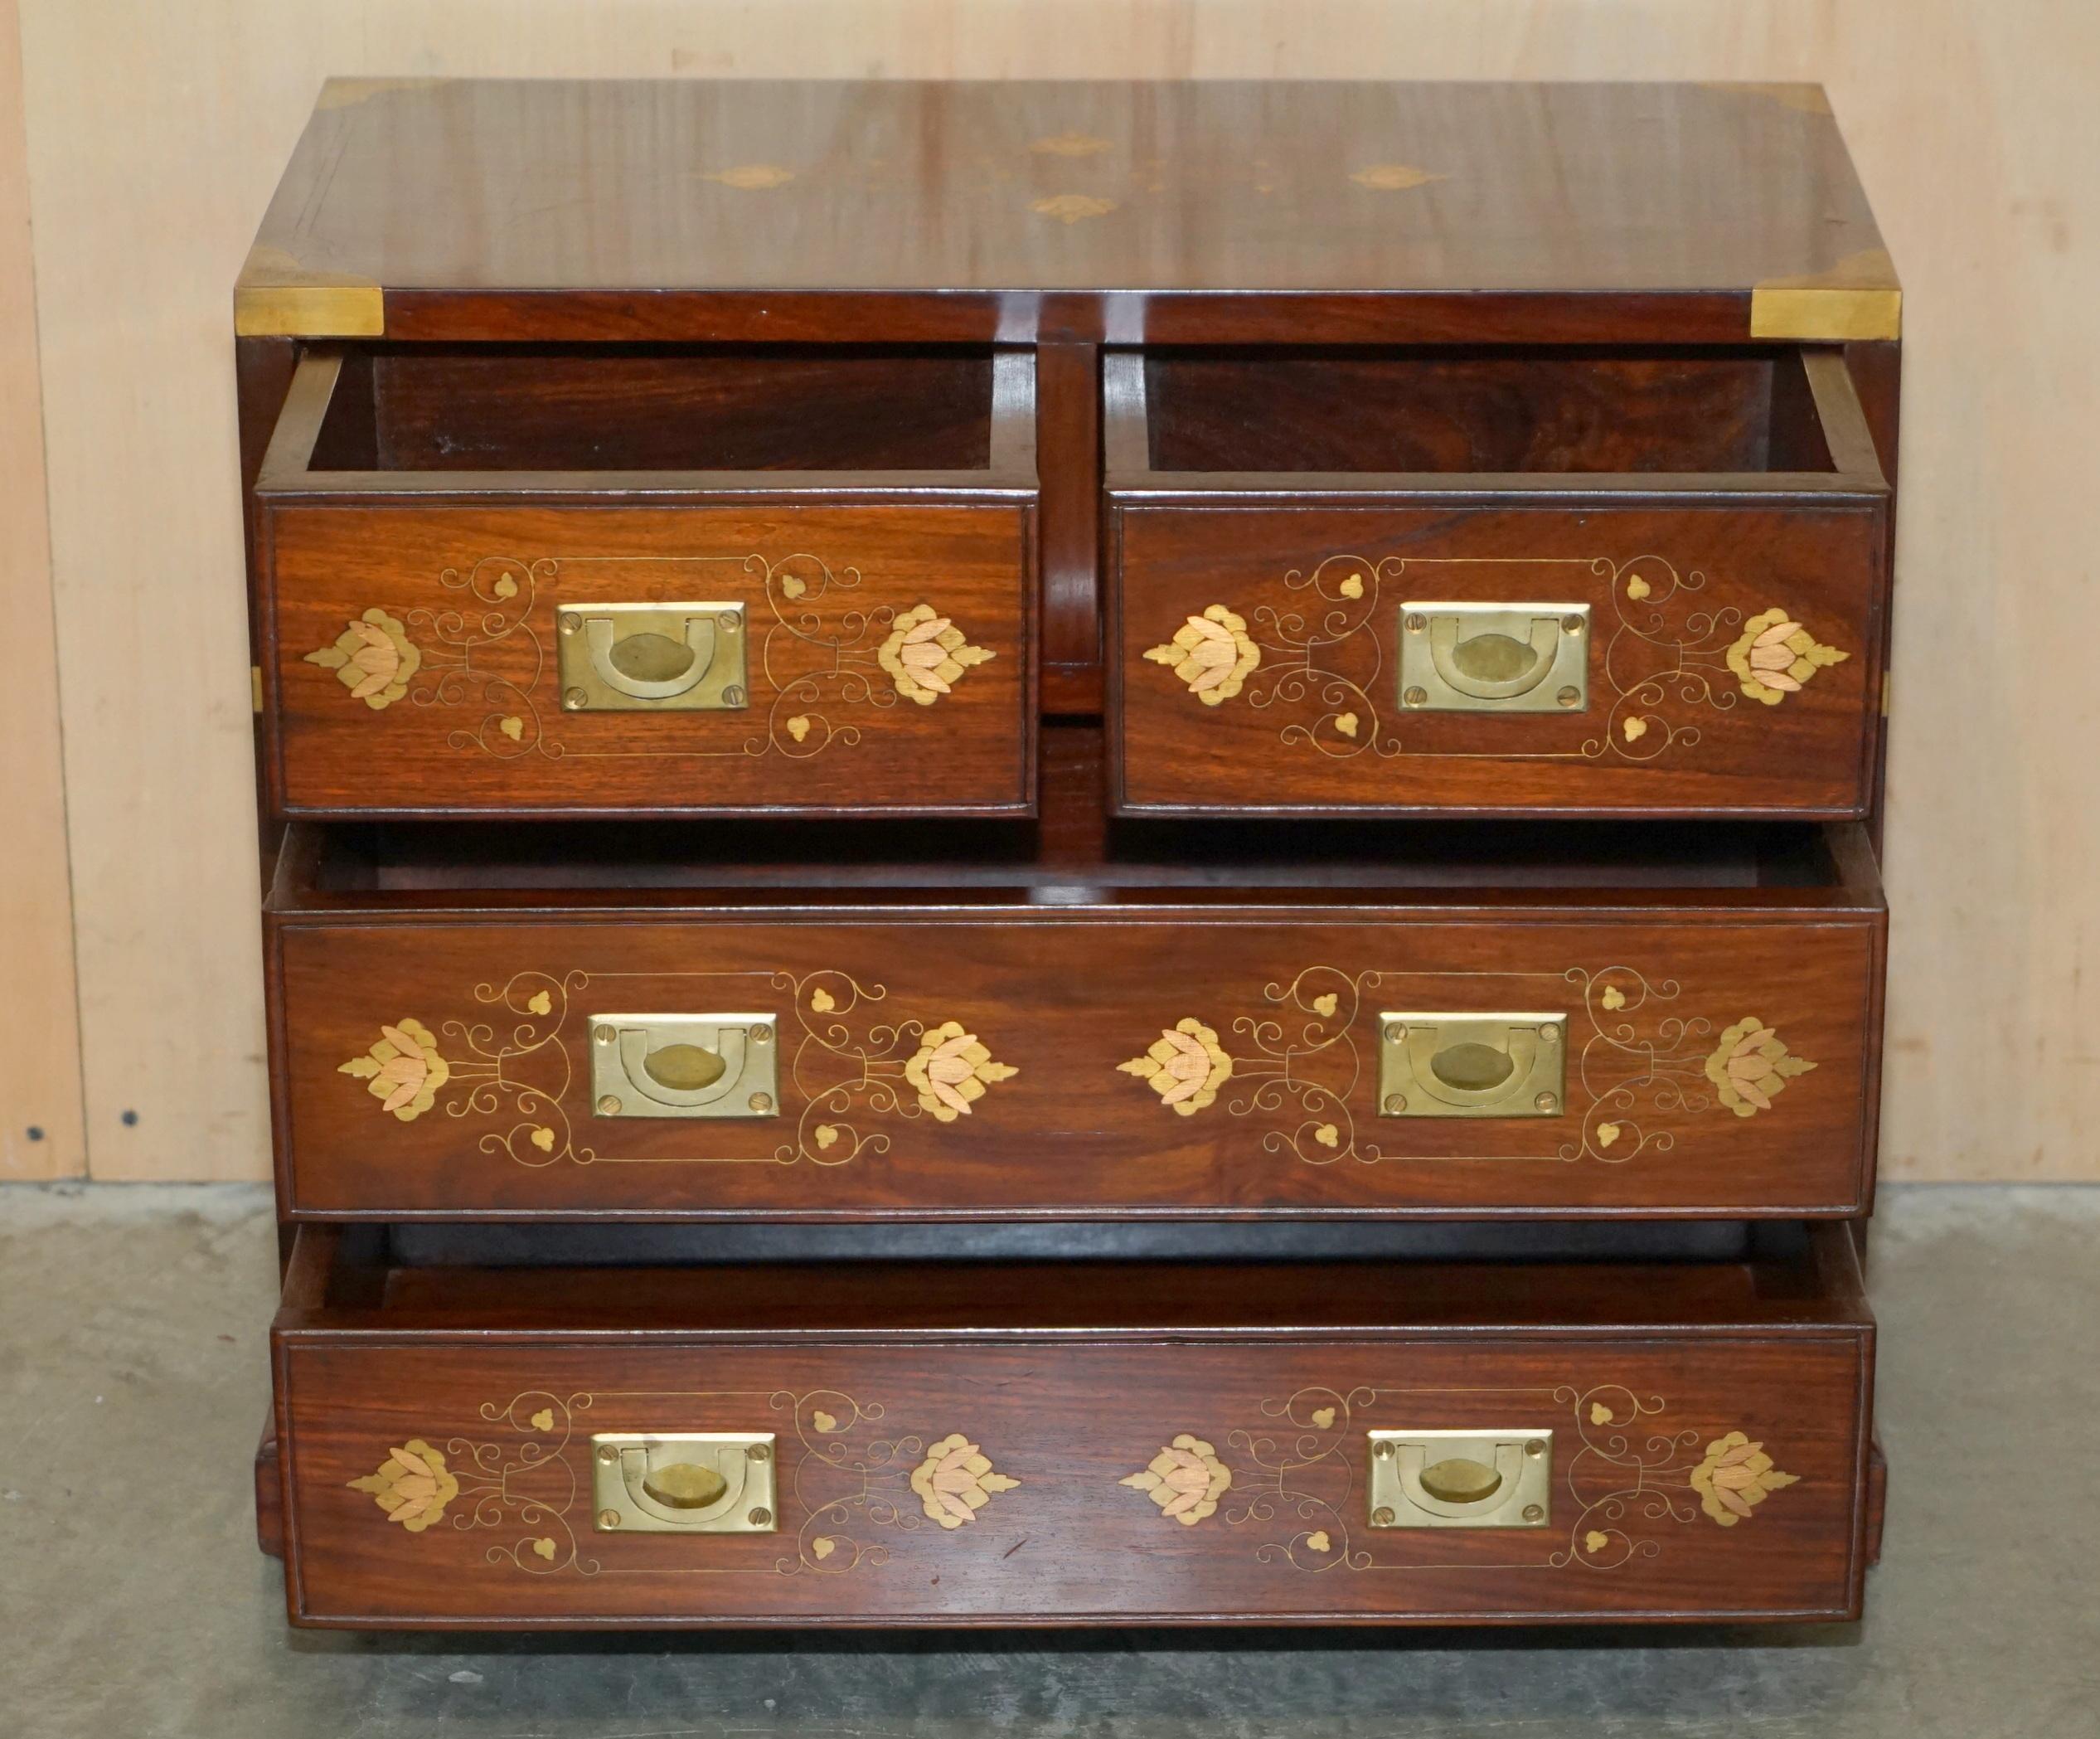 ANTIQUE 1920 HARDWOOD & BRASS INLAID CAMPAIGN CHEST OF DRAWERS SiDE TABLE SIZED 10